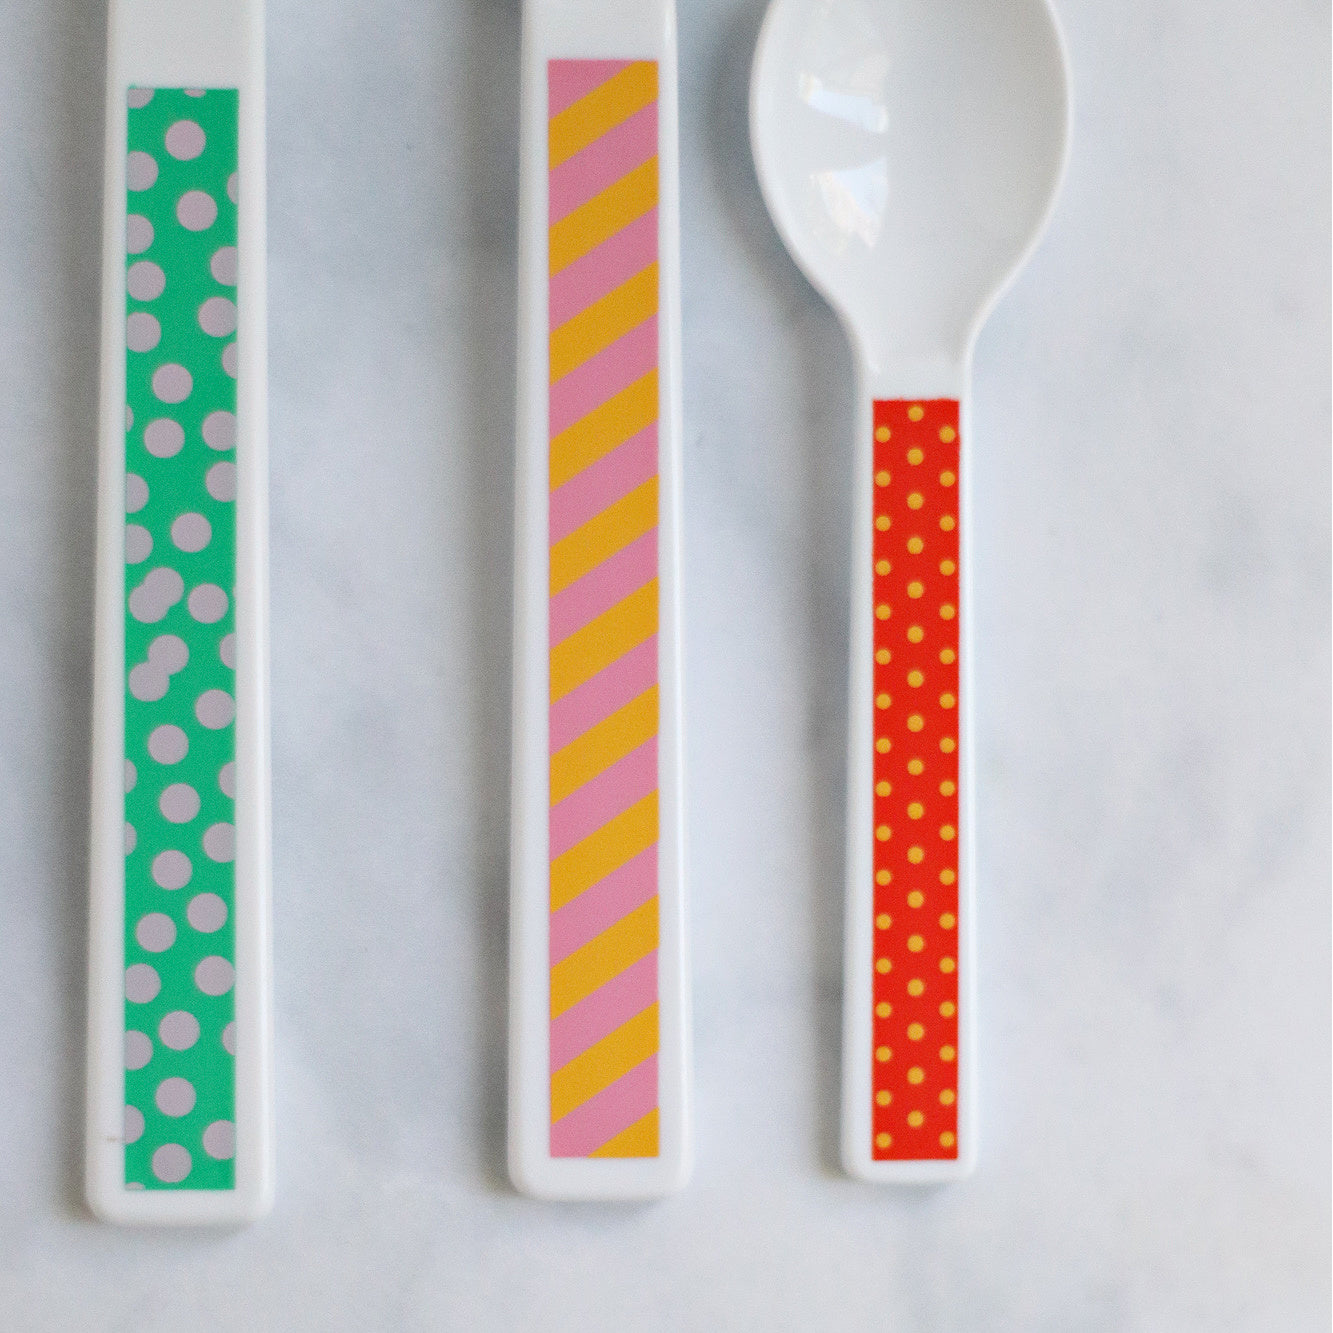 a close up of the cutlery handles detailing the colourful patterns on each utensil.